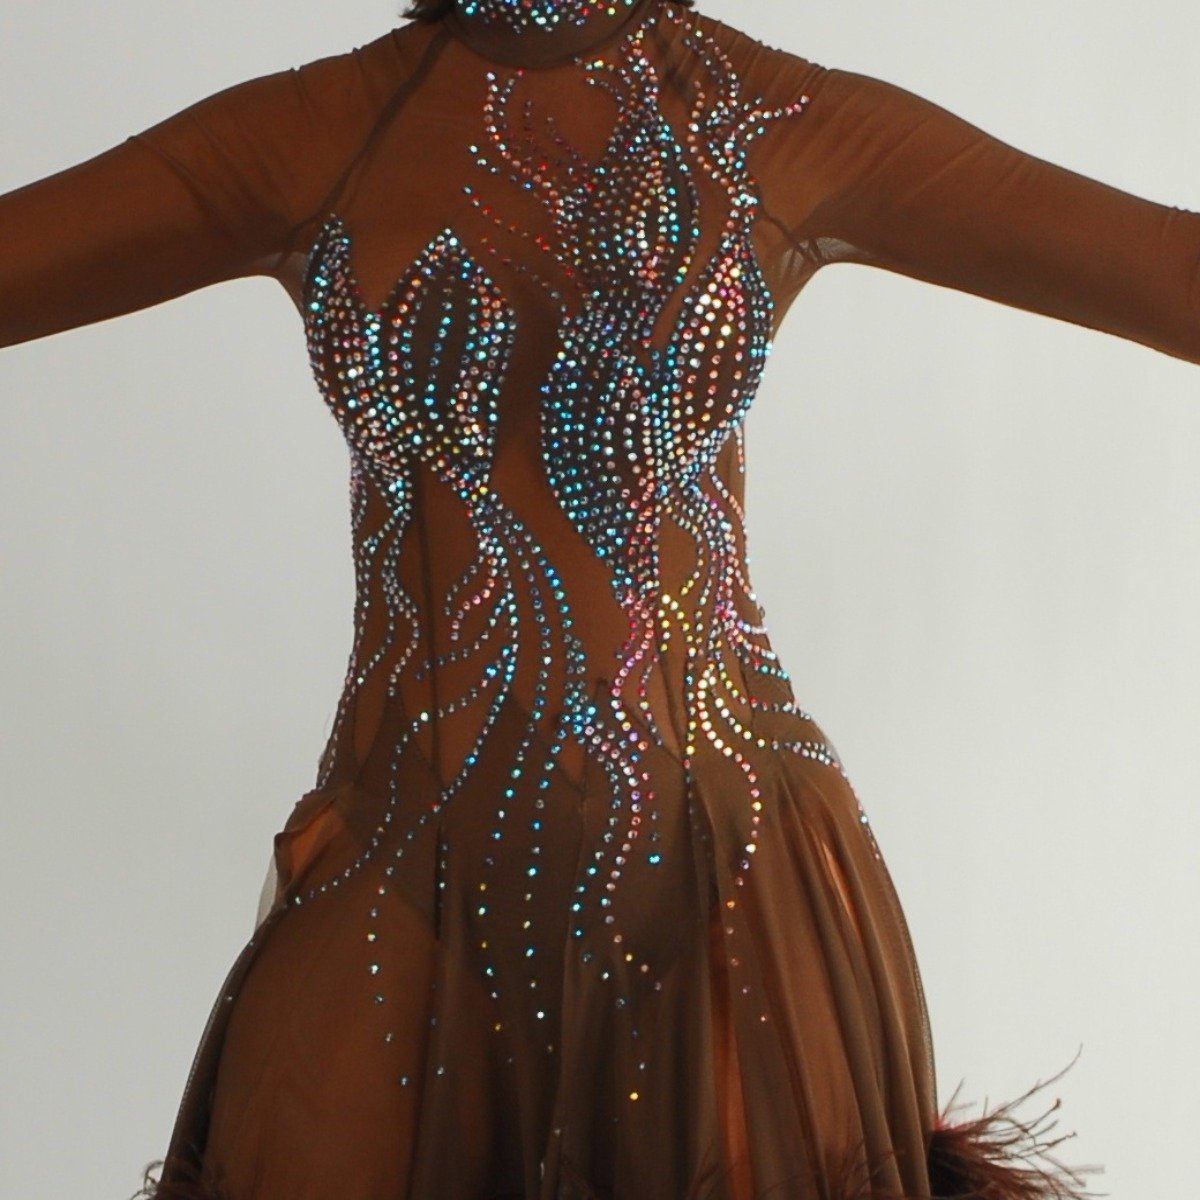 Crystal's Creations close up view of brown ballroom dress created of brown sheer mesh illusion with detailed Swarovski rhinestone work in aqua Abs & brown ostrich feathers